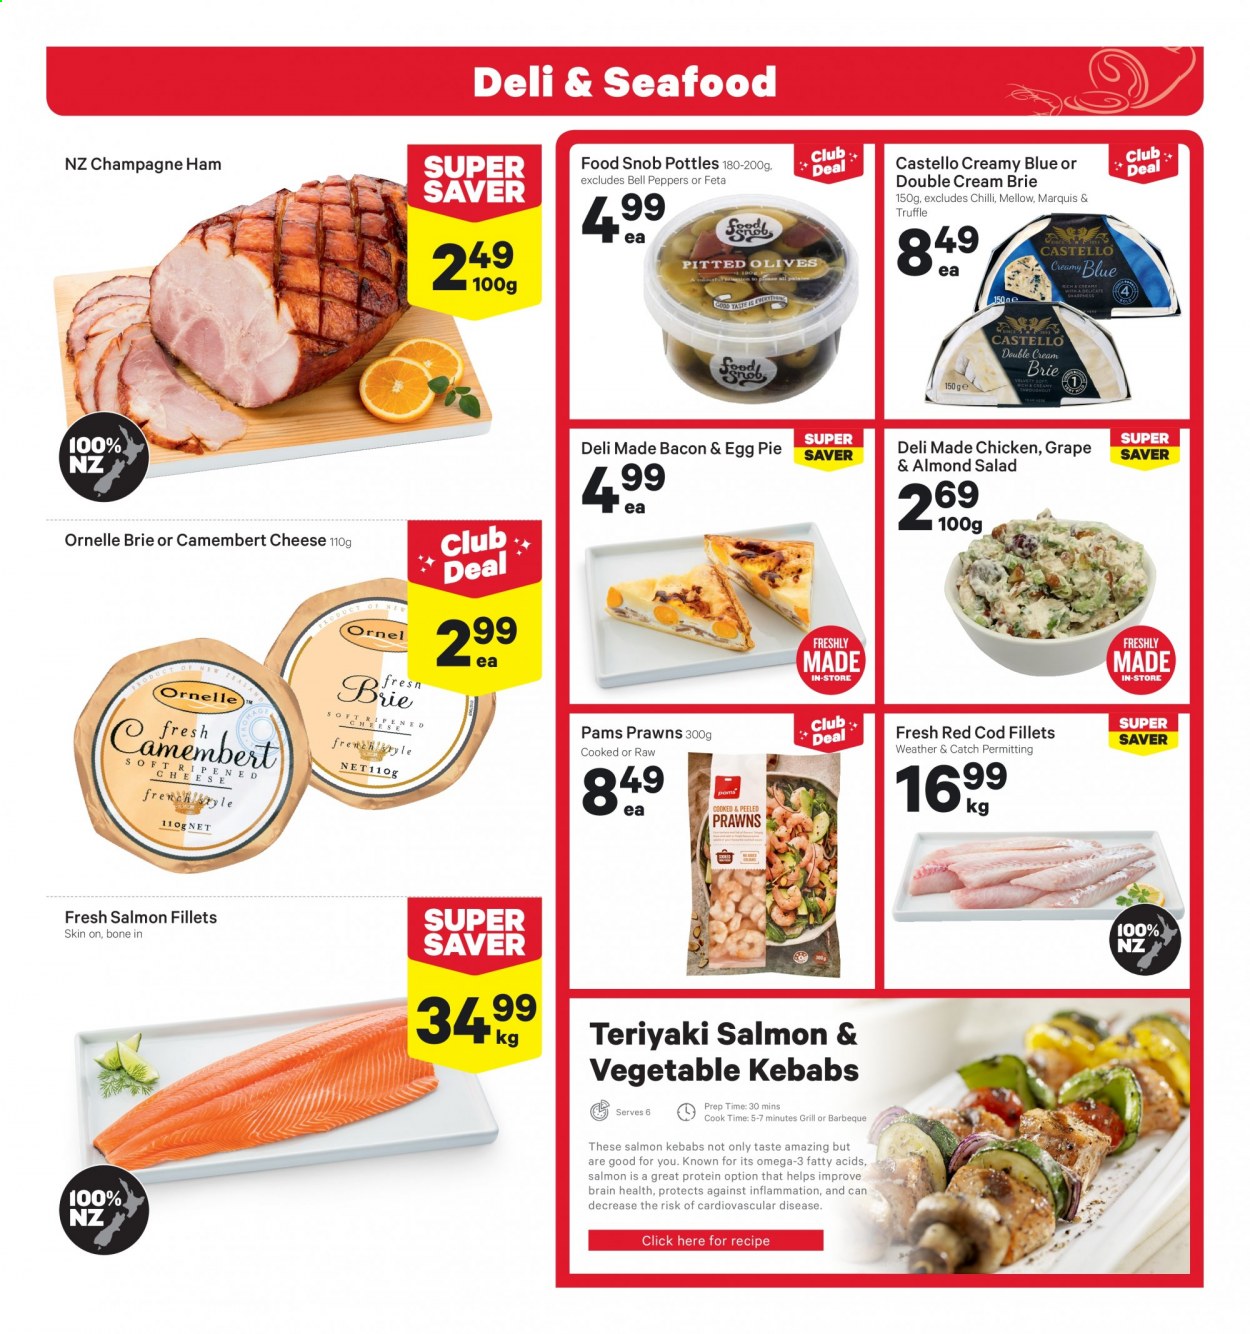 thumbnail - New World mailer - 01.03.2021 - 07.03.2021 - Sales products - bell peppers, pie, salad, peppers, cod, salmon, salmon fillet, prawns, bacon, ham, camembert, cheese, brie, feta, eggs, truffles, almonds, champagne, Omega-3. Page 9.